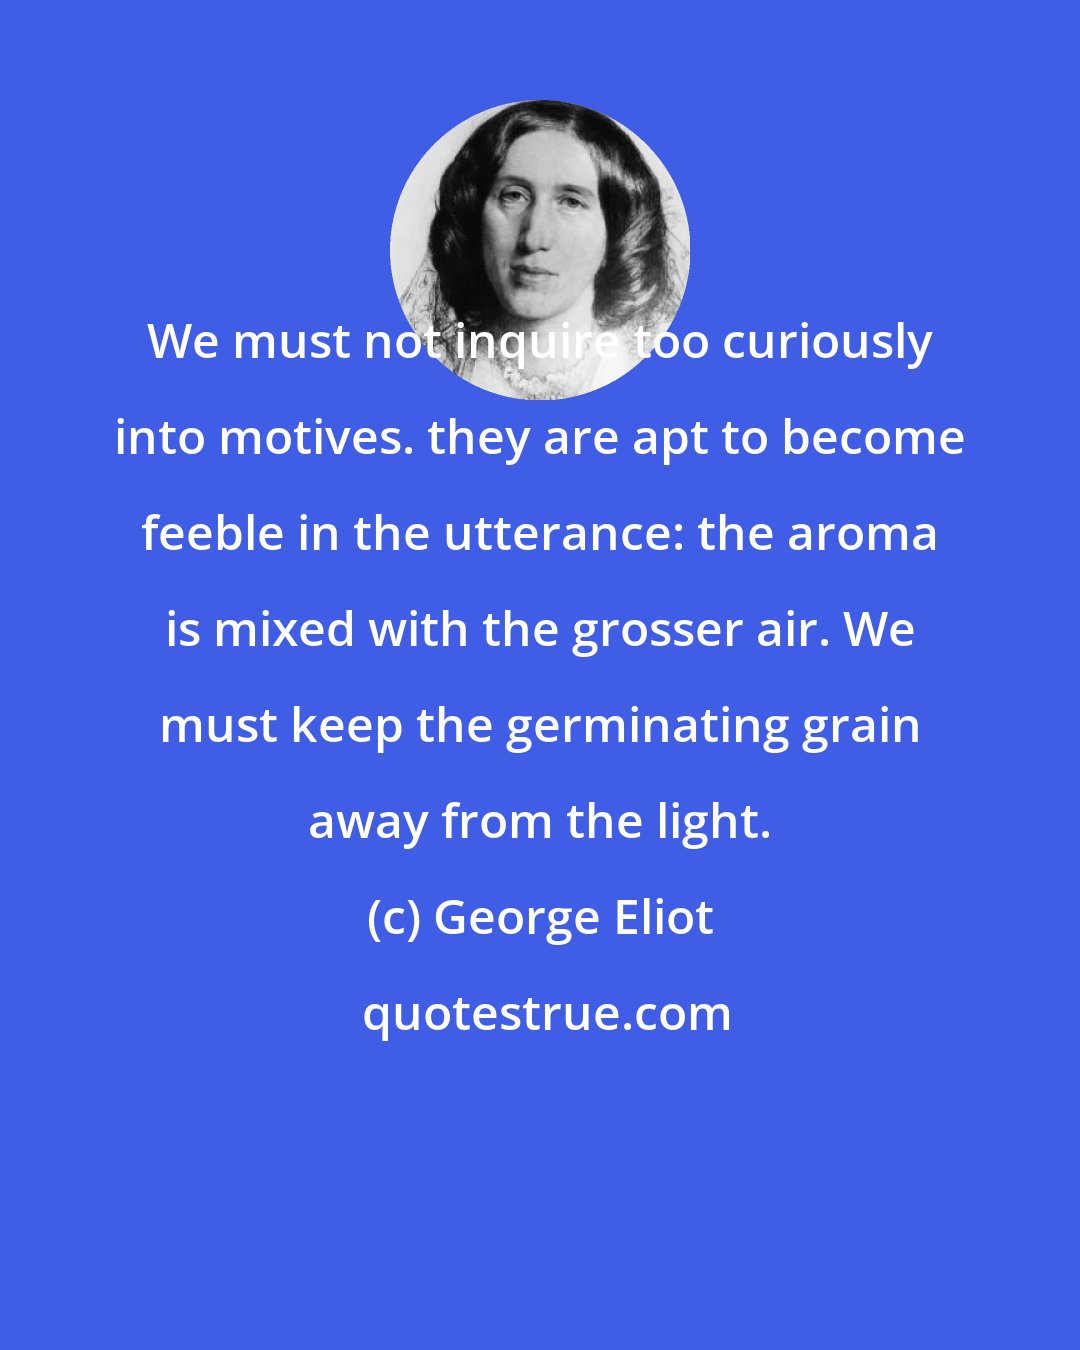 George Eliot: We must not inquire too curiously into motives. they are apt to become feeble in the utterance: the aroma is mixed with the grosser air. We must keep the germinating grain away from the light.